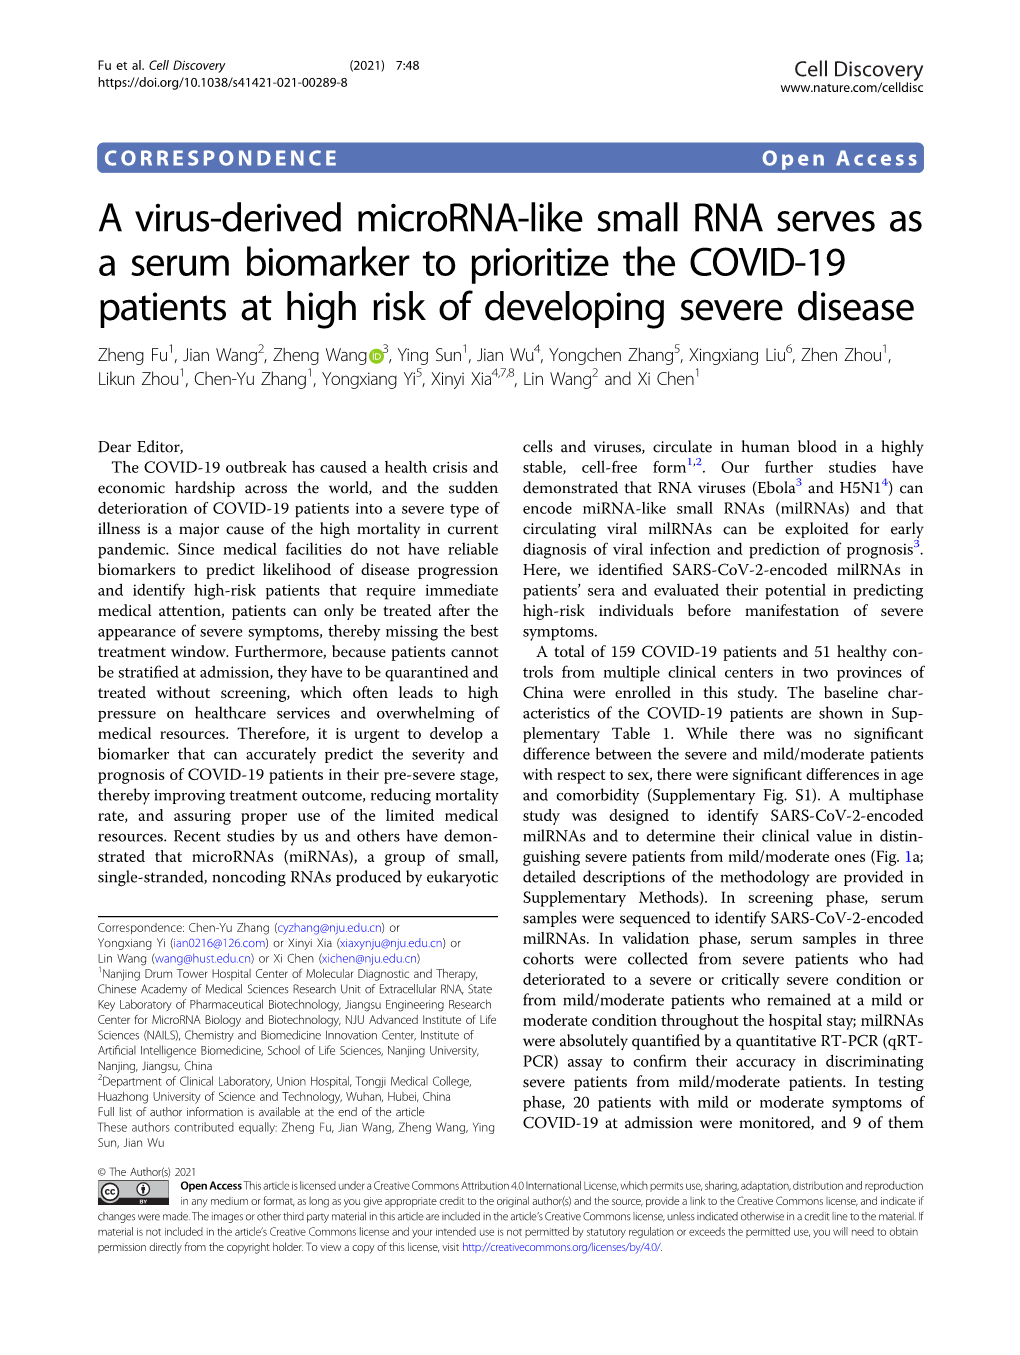 A Virus-Derived Microrna-Like Small RNA Serves As a Serum Biomarker to Prioritize the COVID-19 Patients at High Risk of Developi